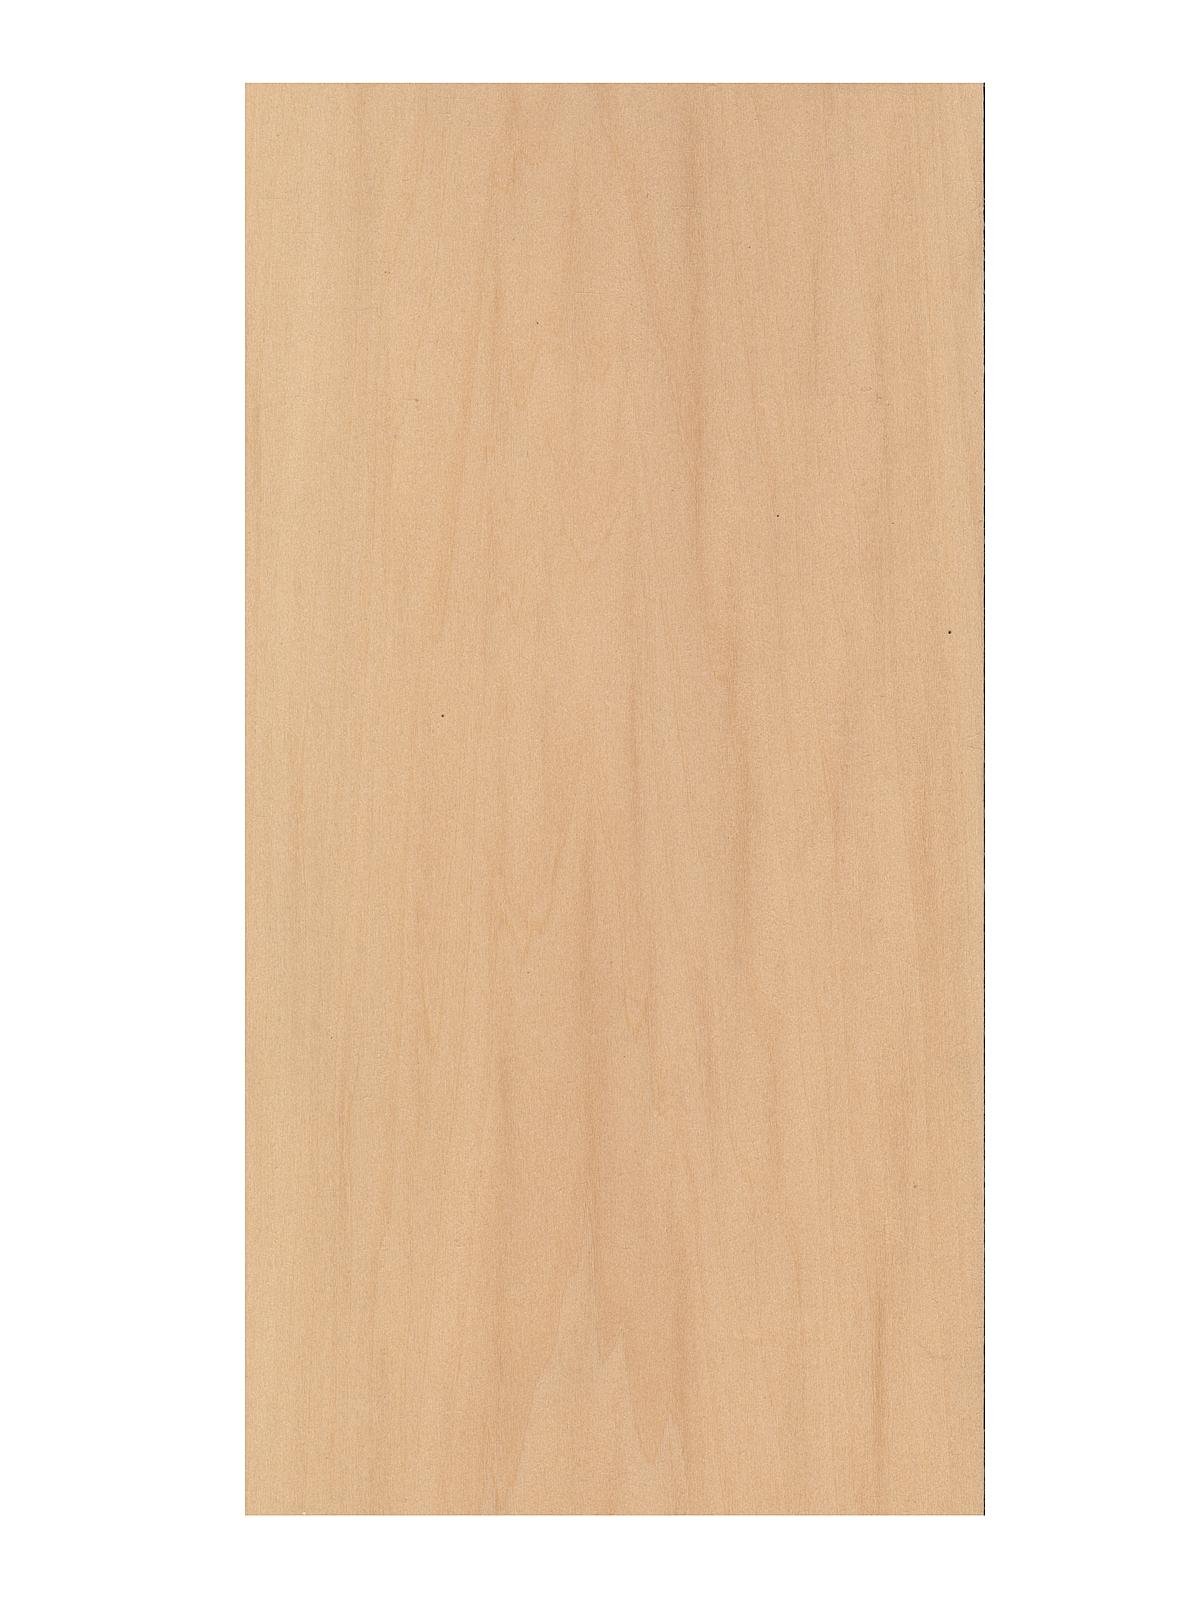 Midwest Products 1/16 In. x 3 In. x 3 Ft. Basswood Board - Anderson Lumber